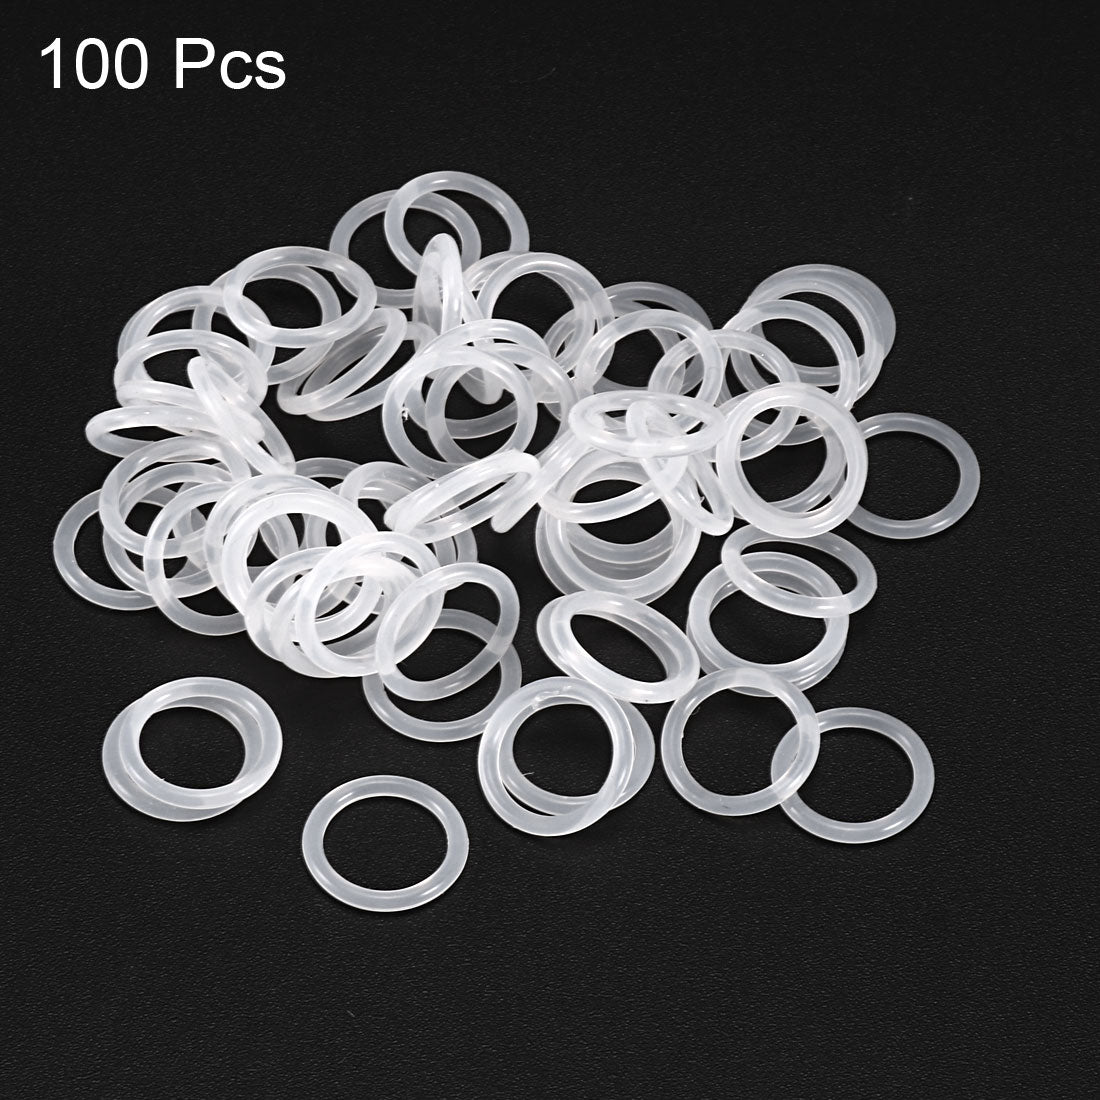 uxcell Uxcell 100Pcs White 12mm x 1.5mm Silicone Rubber Gasket O Ring Sealing Ring